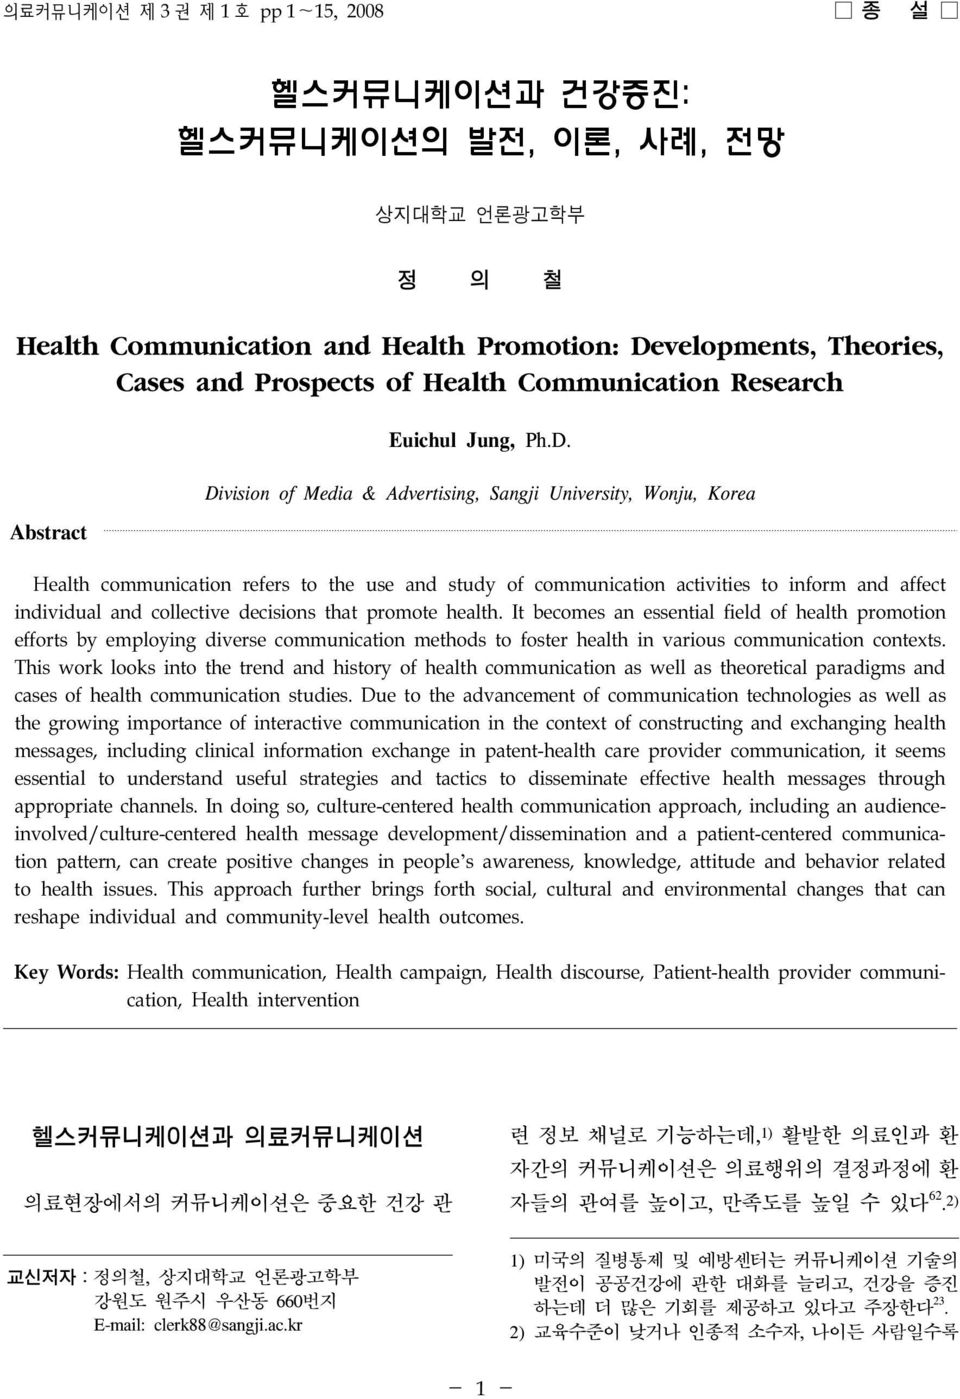 Division of Media & Advertising, Sangji University, Wonju, Korea Health communication refers to the use and study of communication activities to inform and affect individual and collective decisions